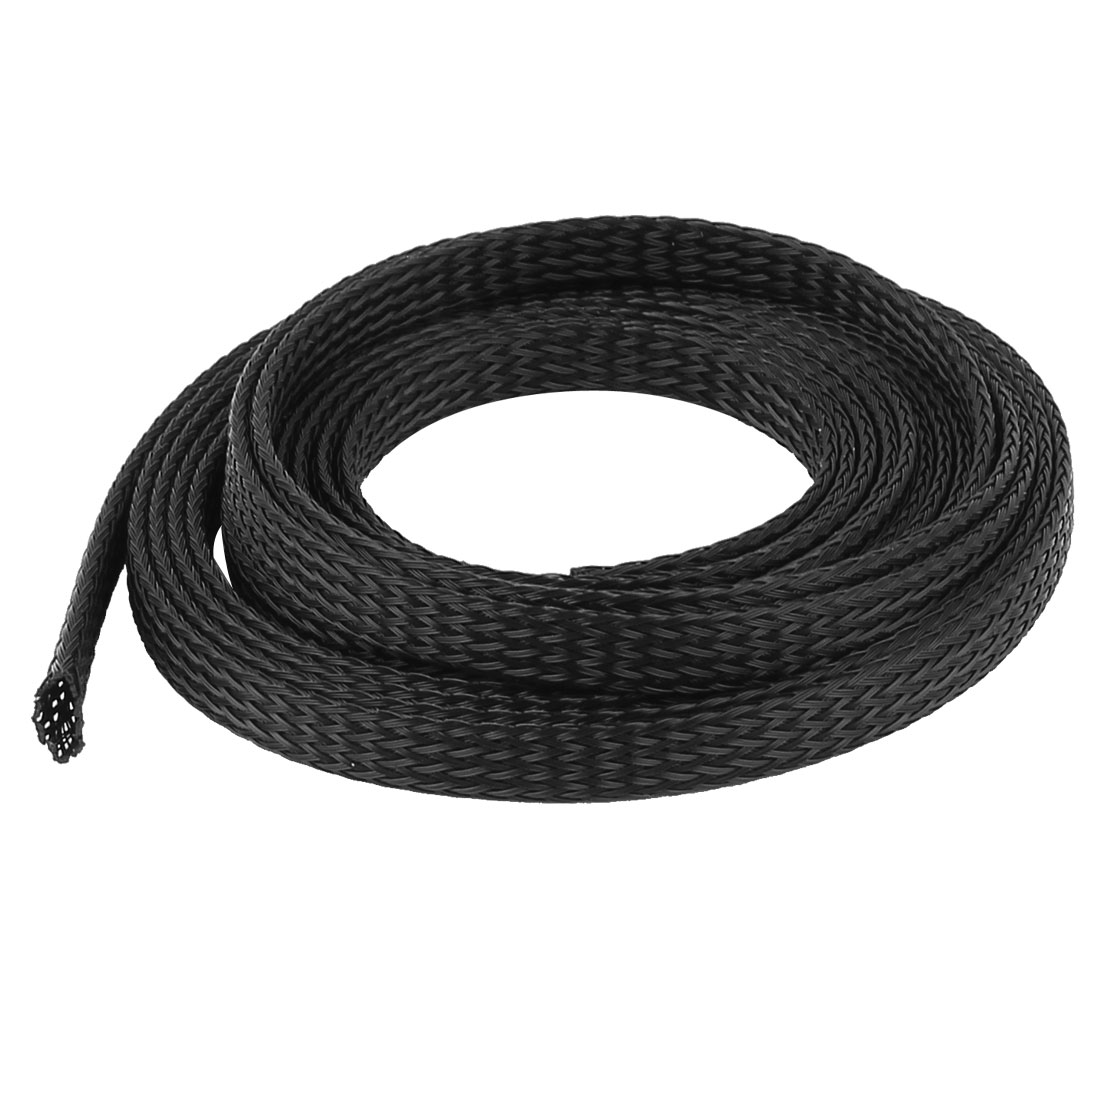 V0 Fire Resistant Polyester PET Braided Sleeving